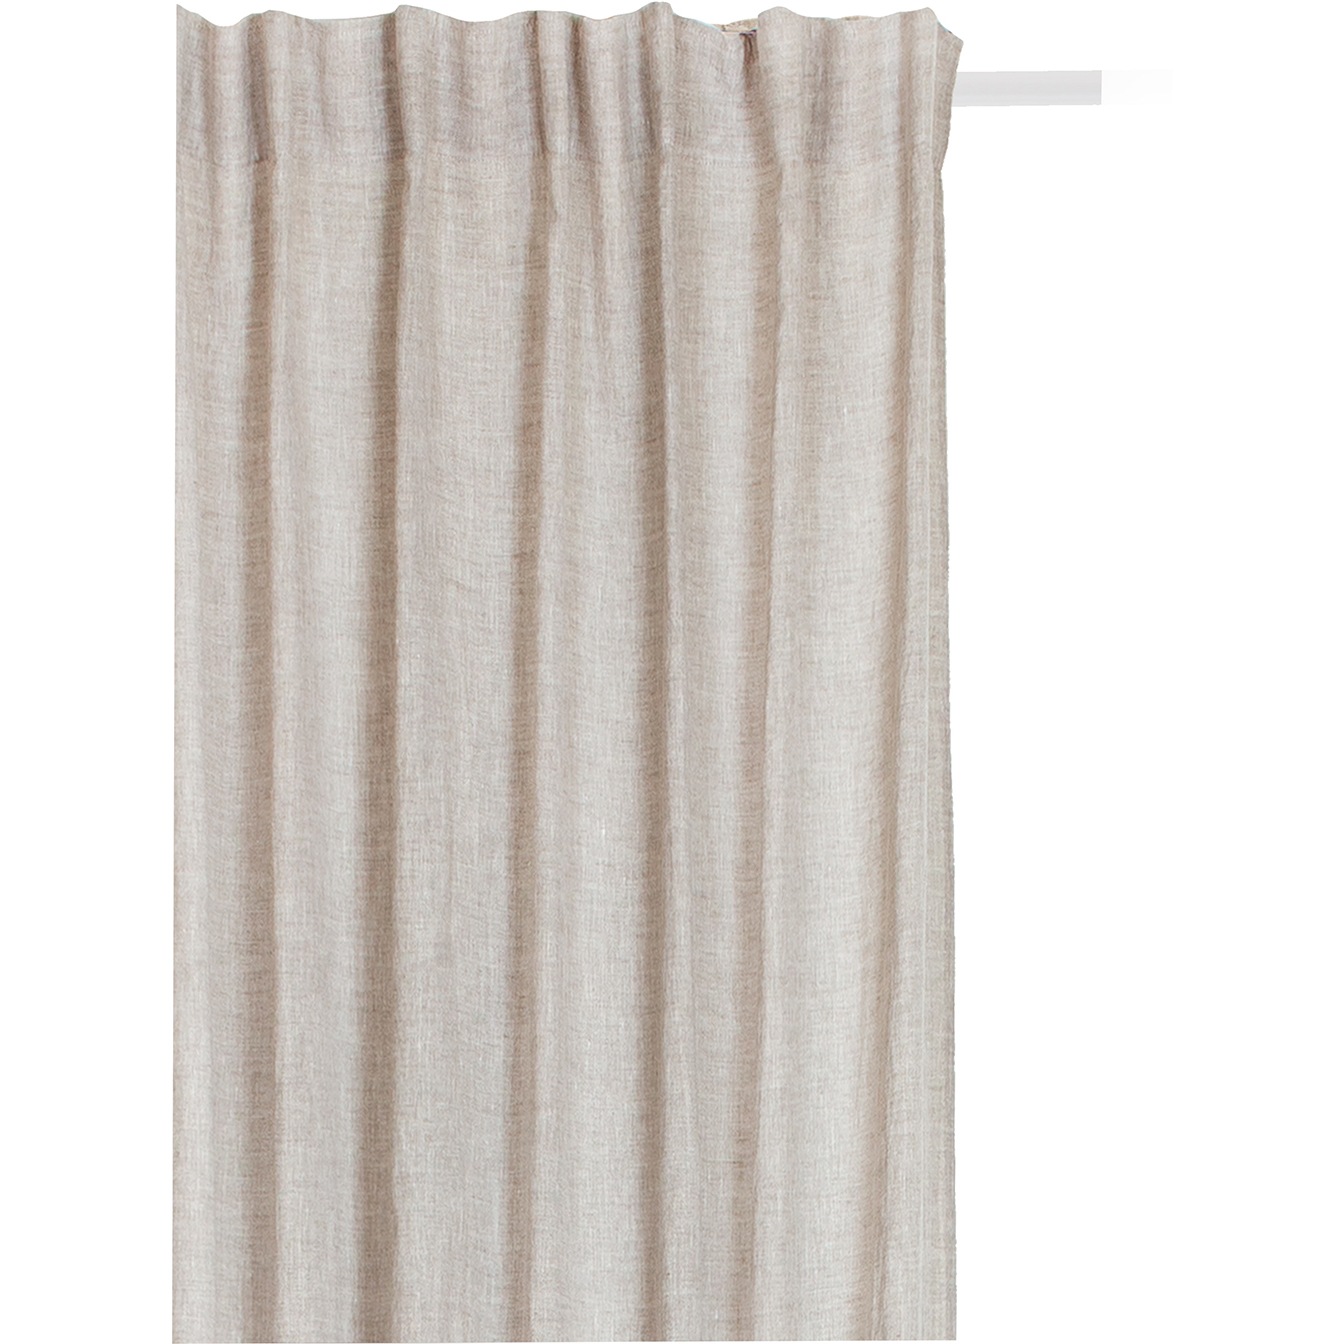 Sunshine Wide Curtain With Heading Tape Oatmeal, 250x290 cm